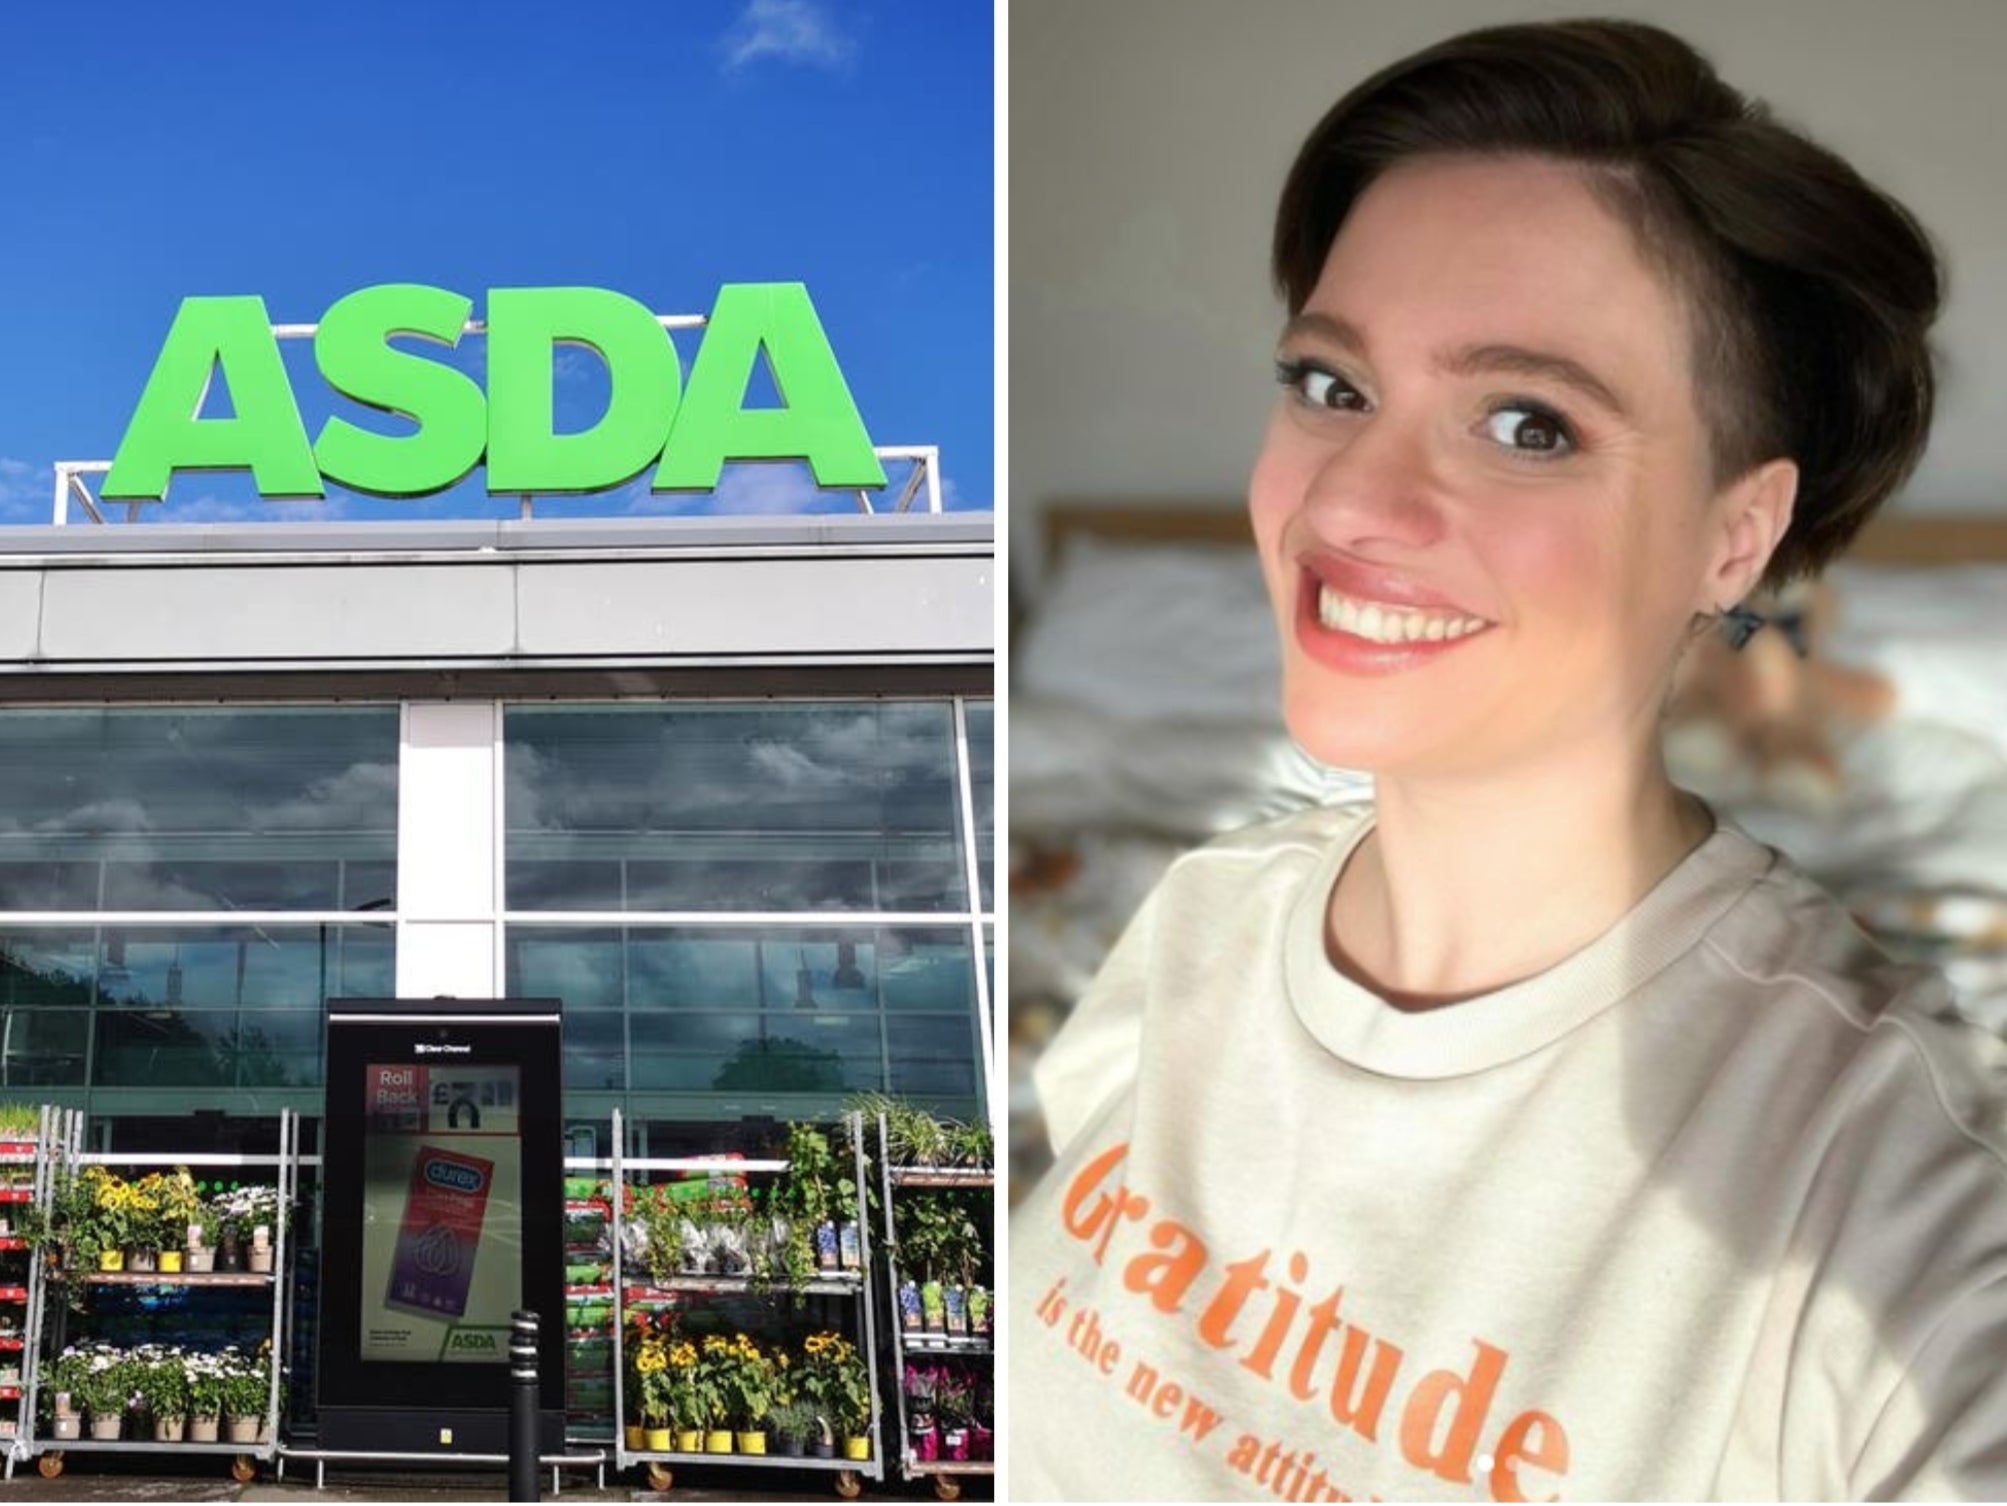 Asda: Latest News, Analysis and Commentary